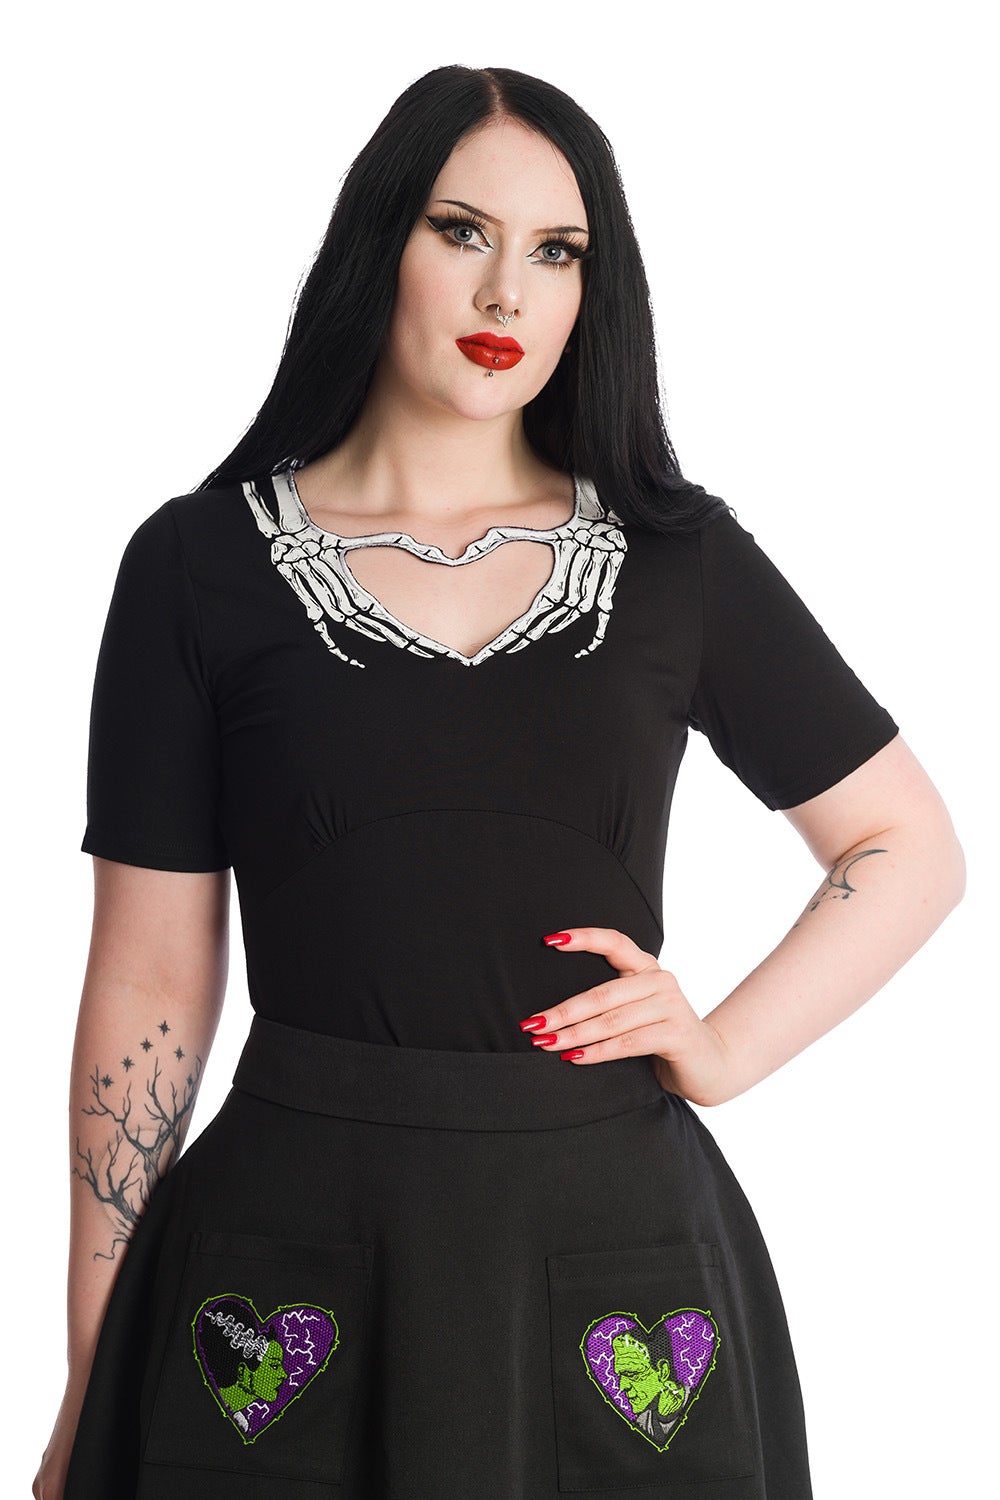 Alternative model wears short sleeve black top with skeleton hands around the collar creating a heart shape. 